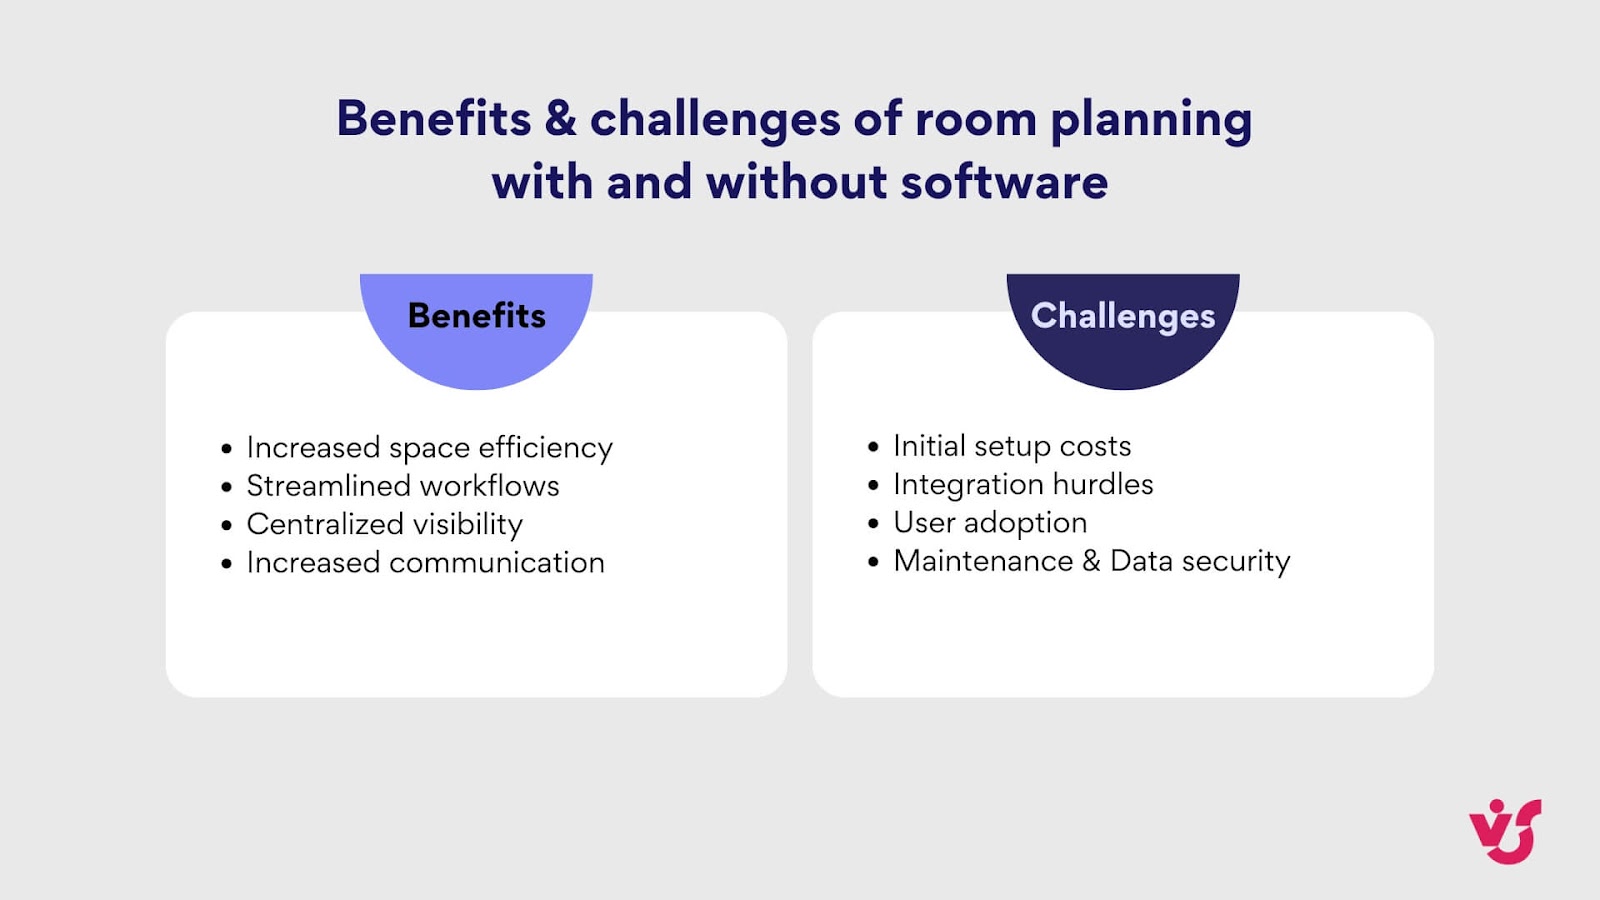 Benefits & challenges of room planning with and without software